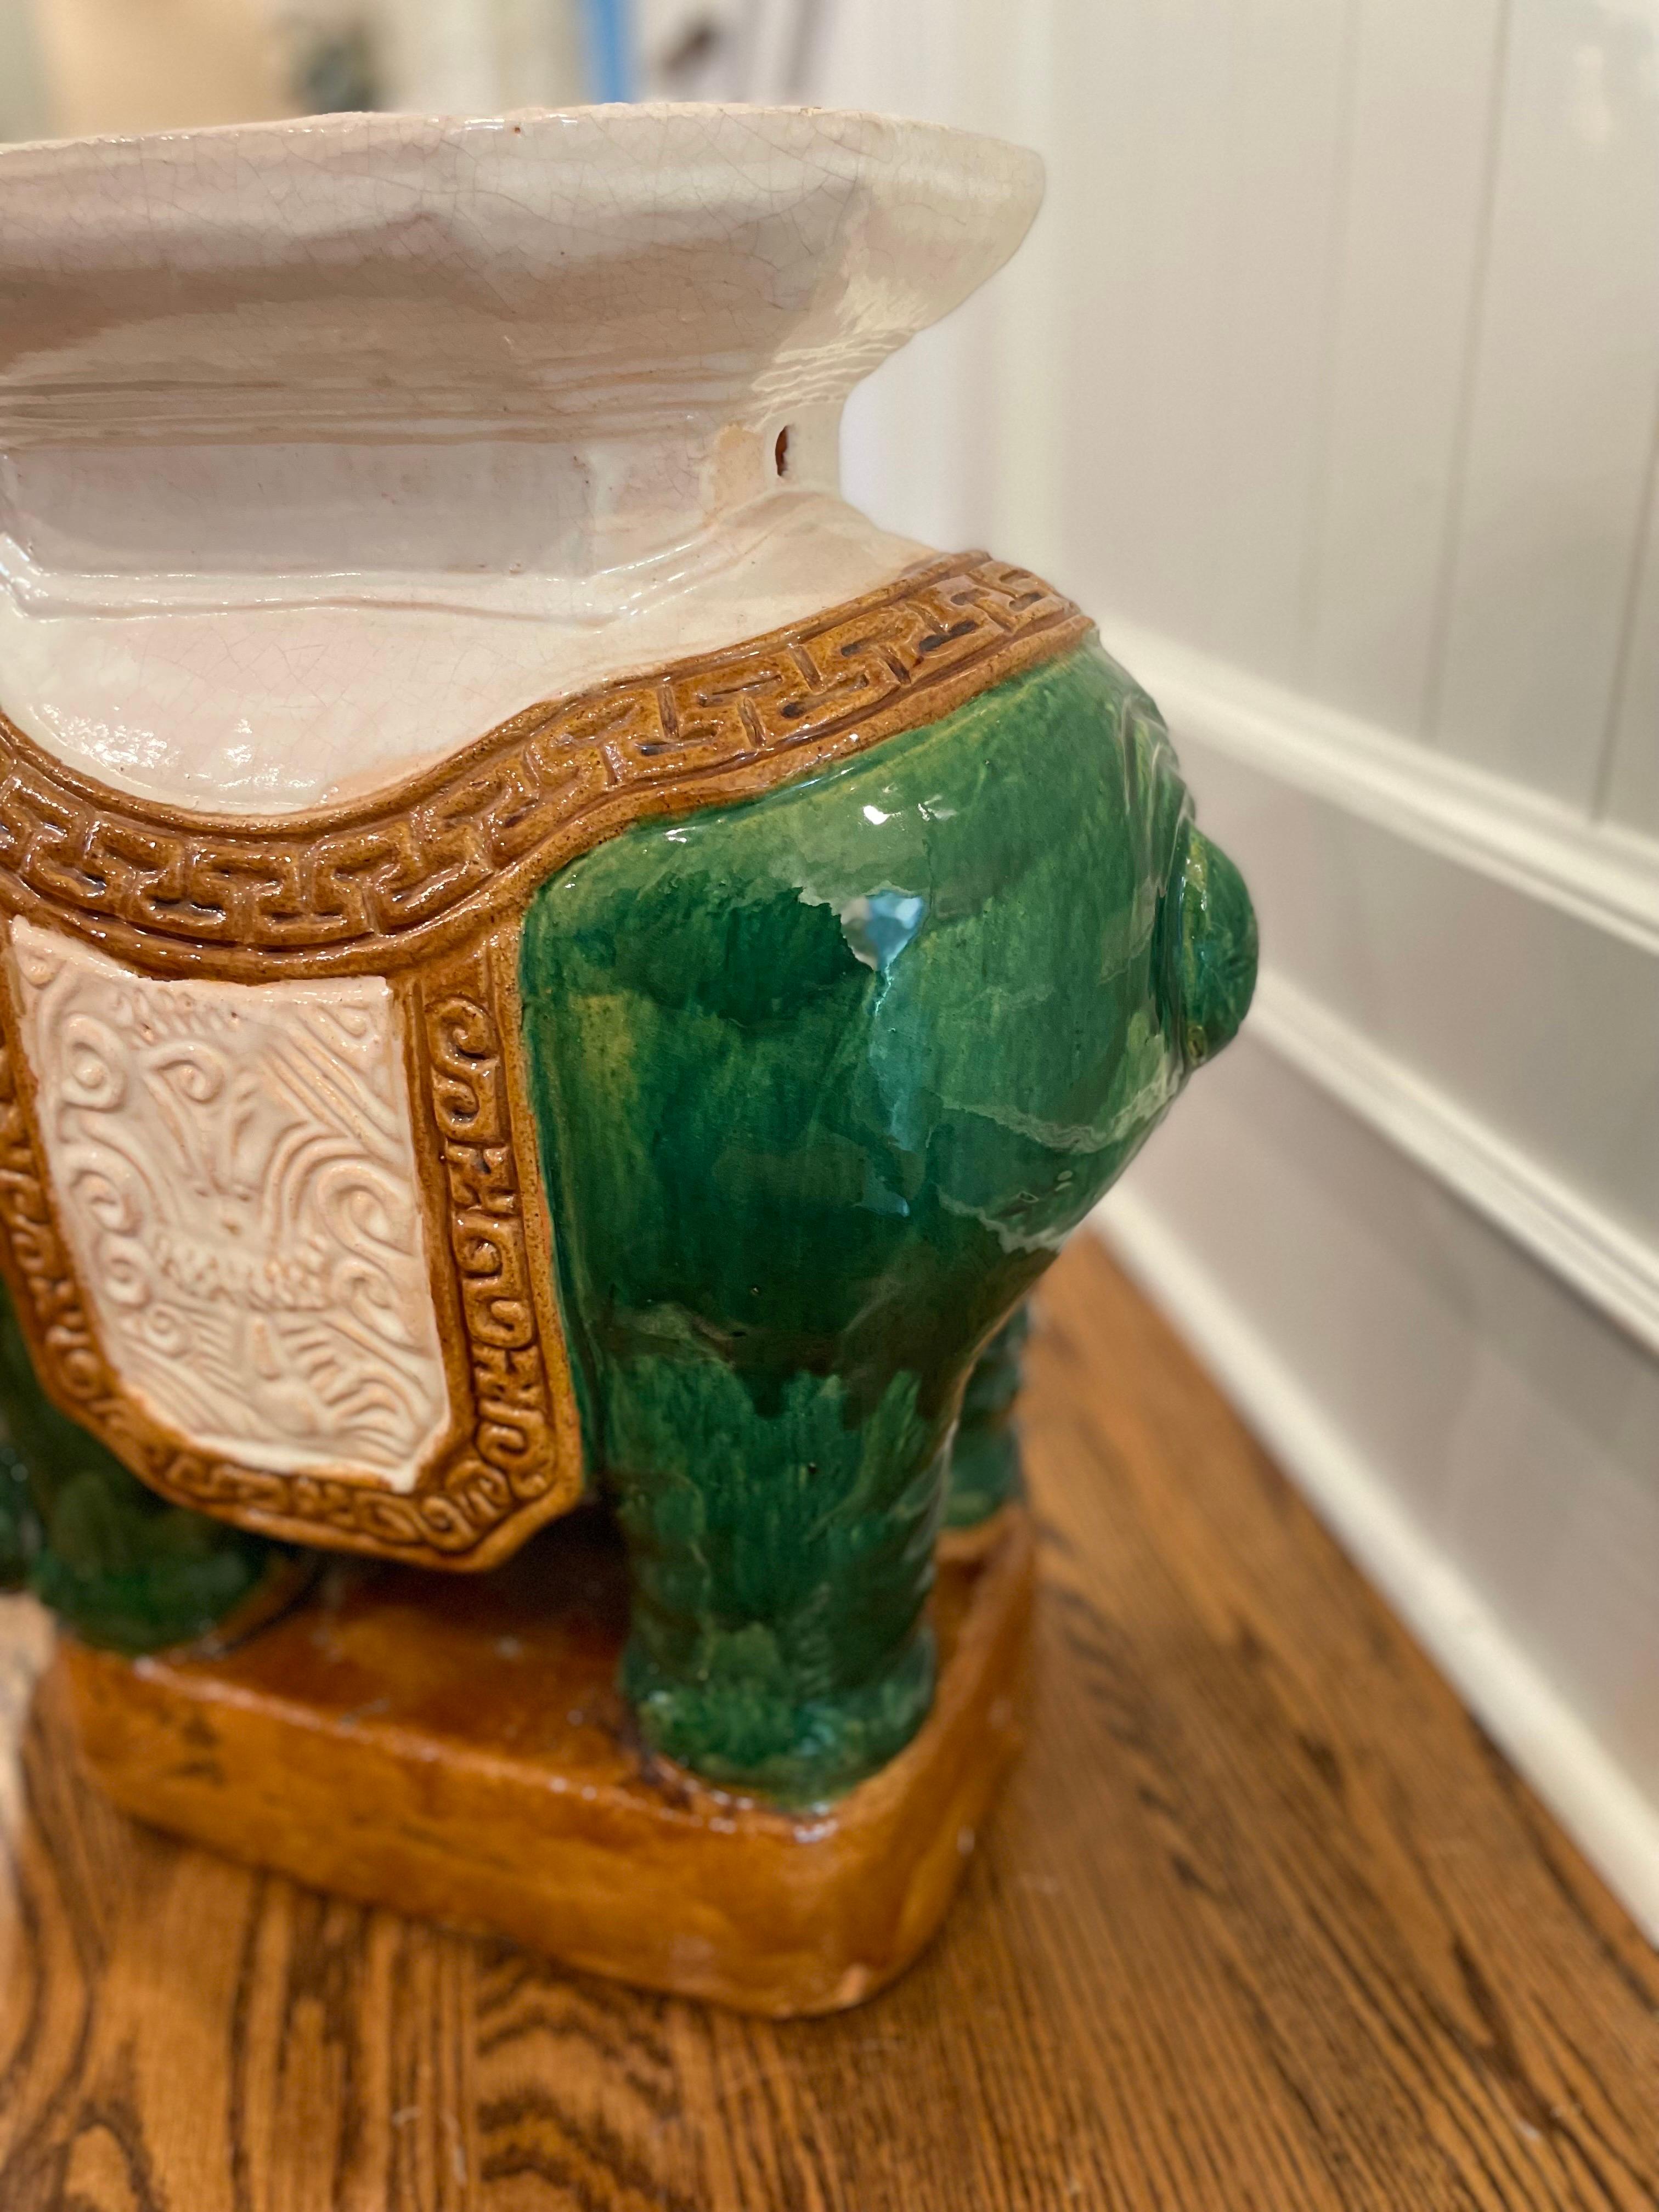 Mid Century Green Elephant Garden Stool Asian Large Ceramic Garden Seat In Good Condition For Sale In Cookeville, TN